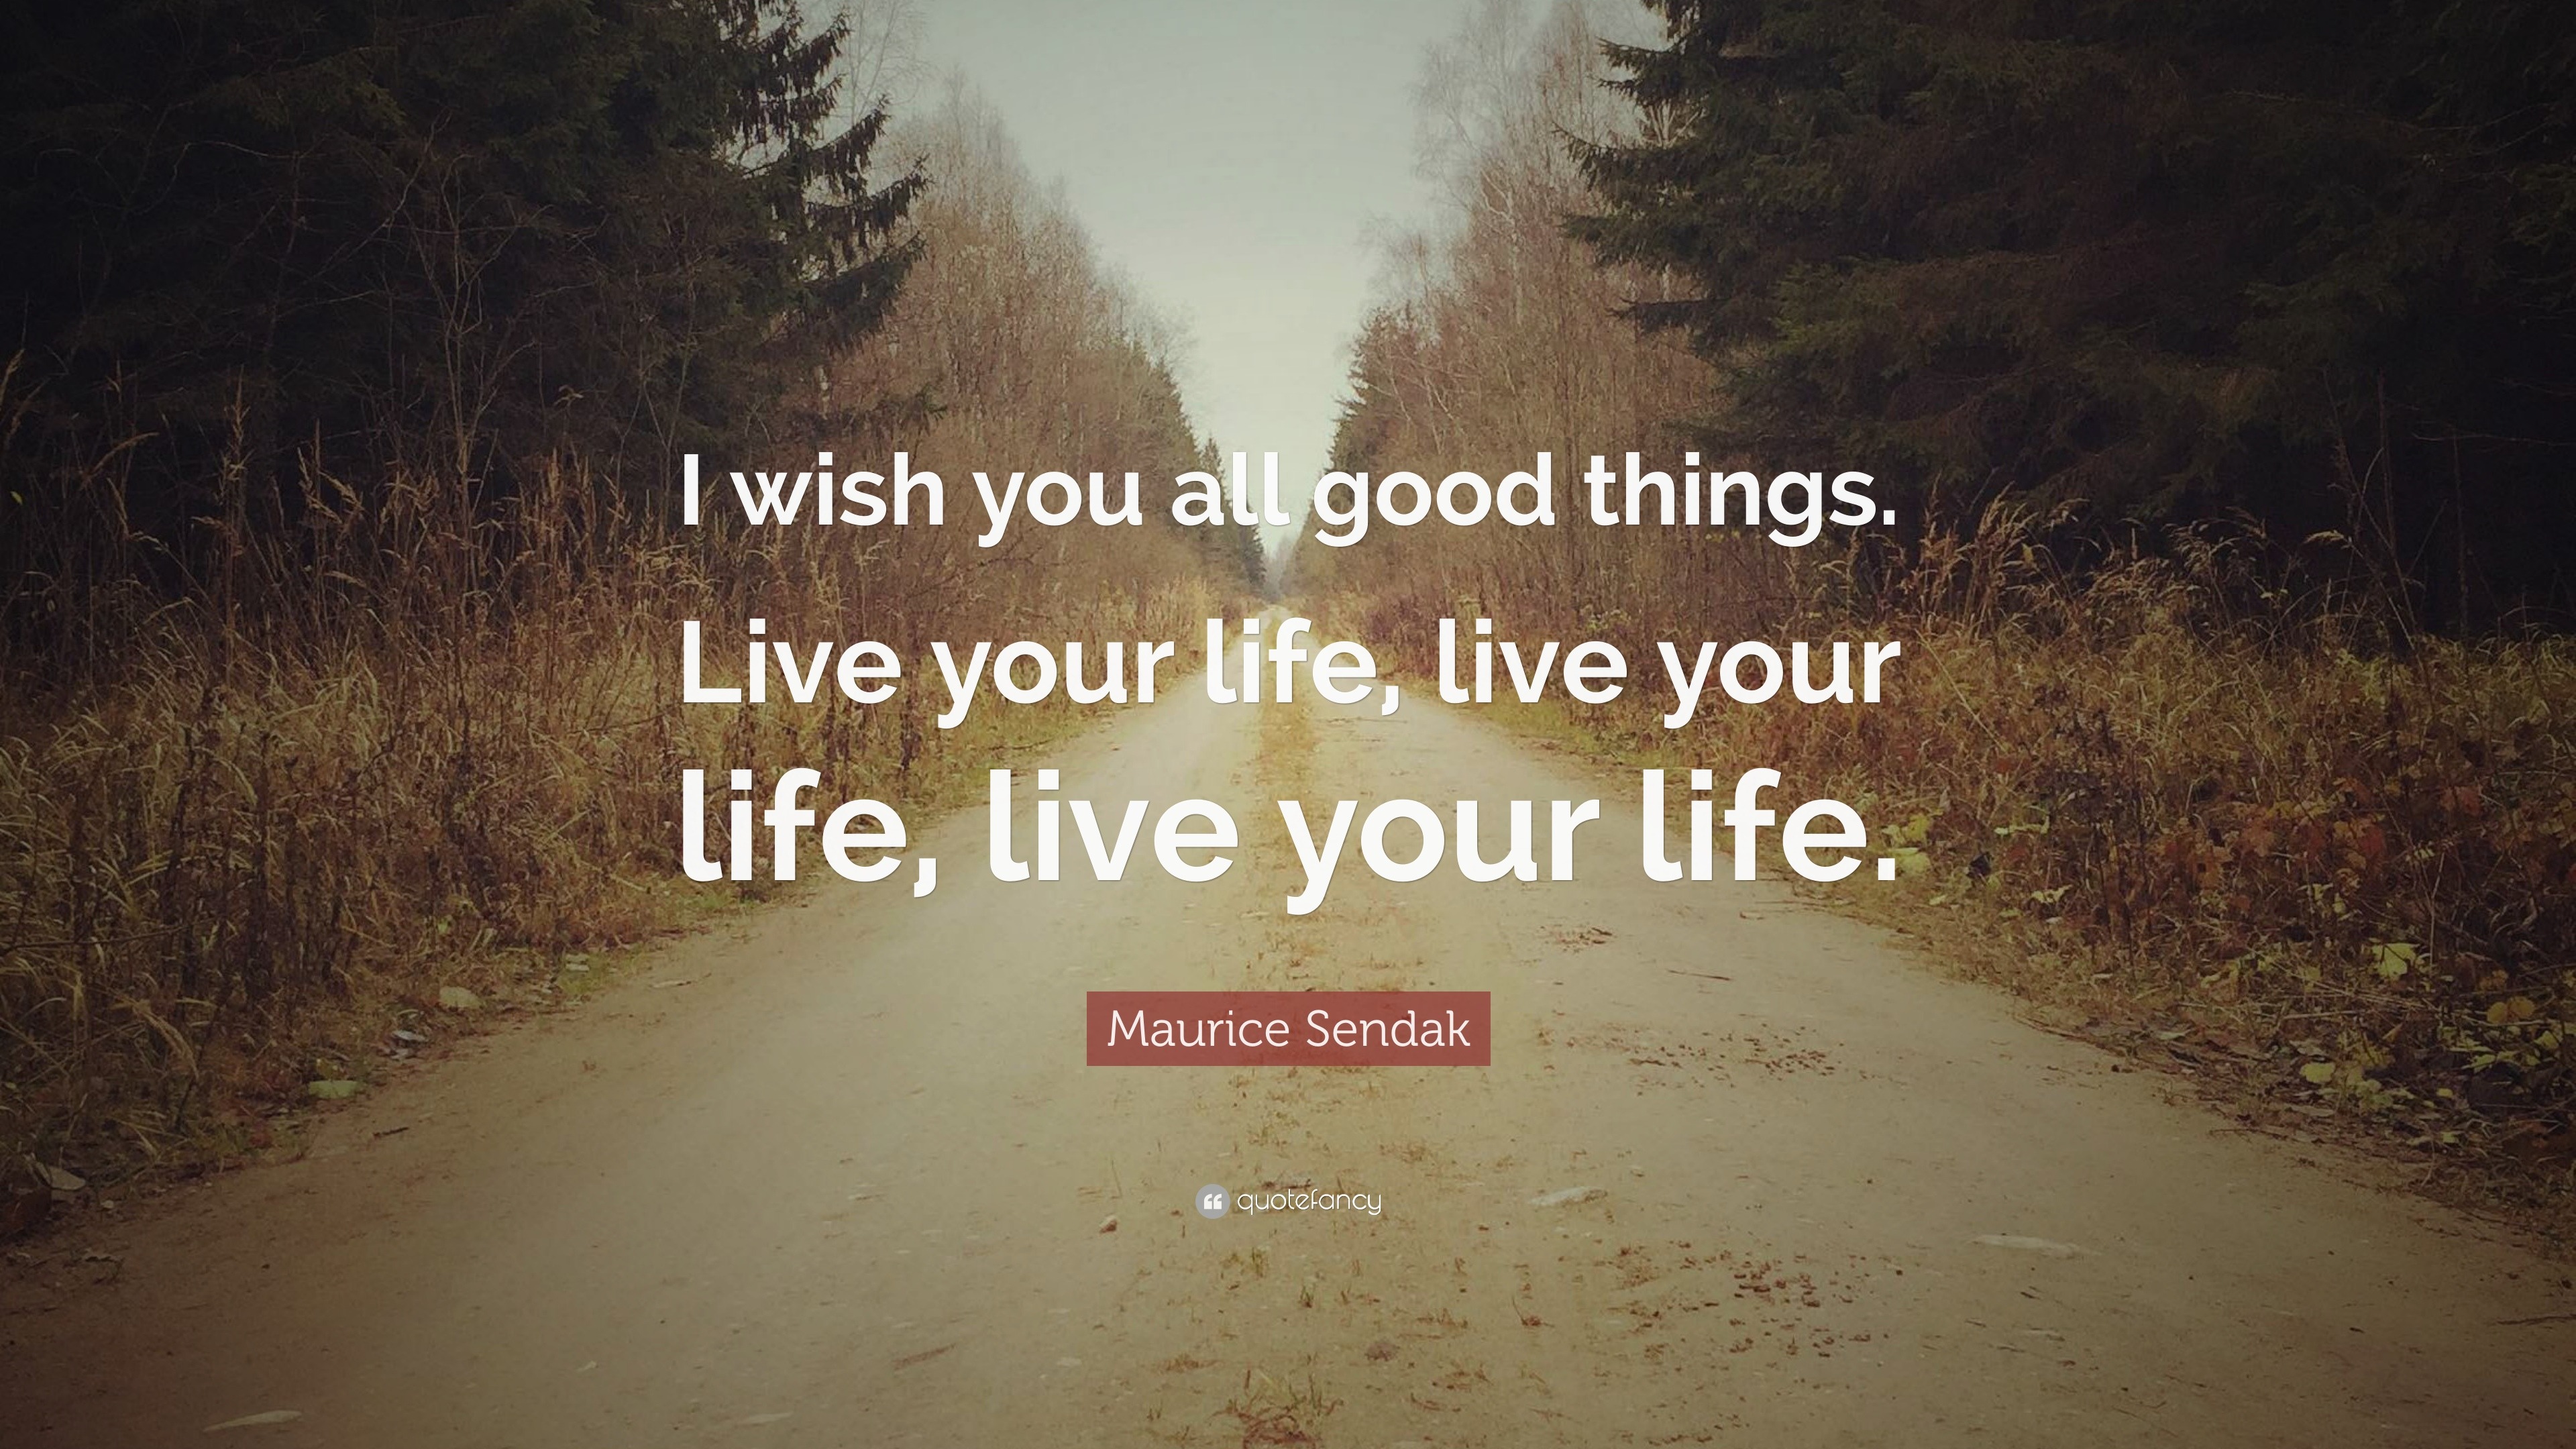 Maurice Sendak Quote: “I wish you all good things. Live your life, live